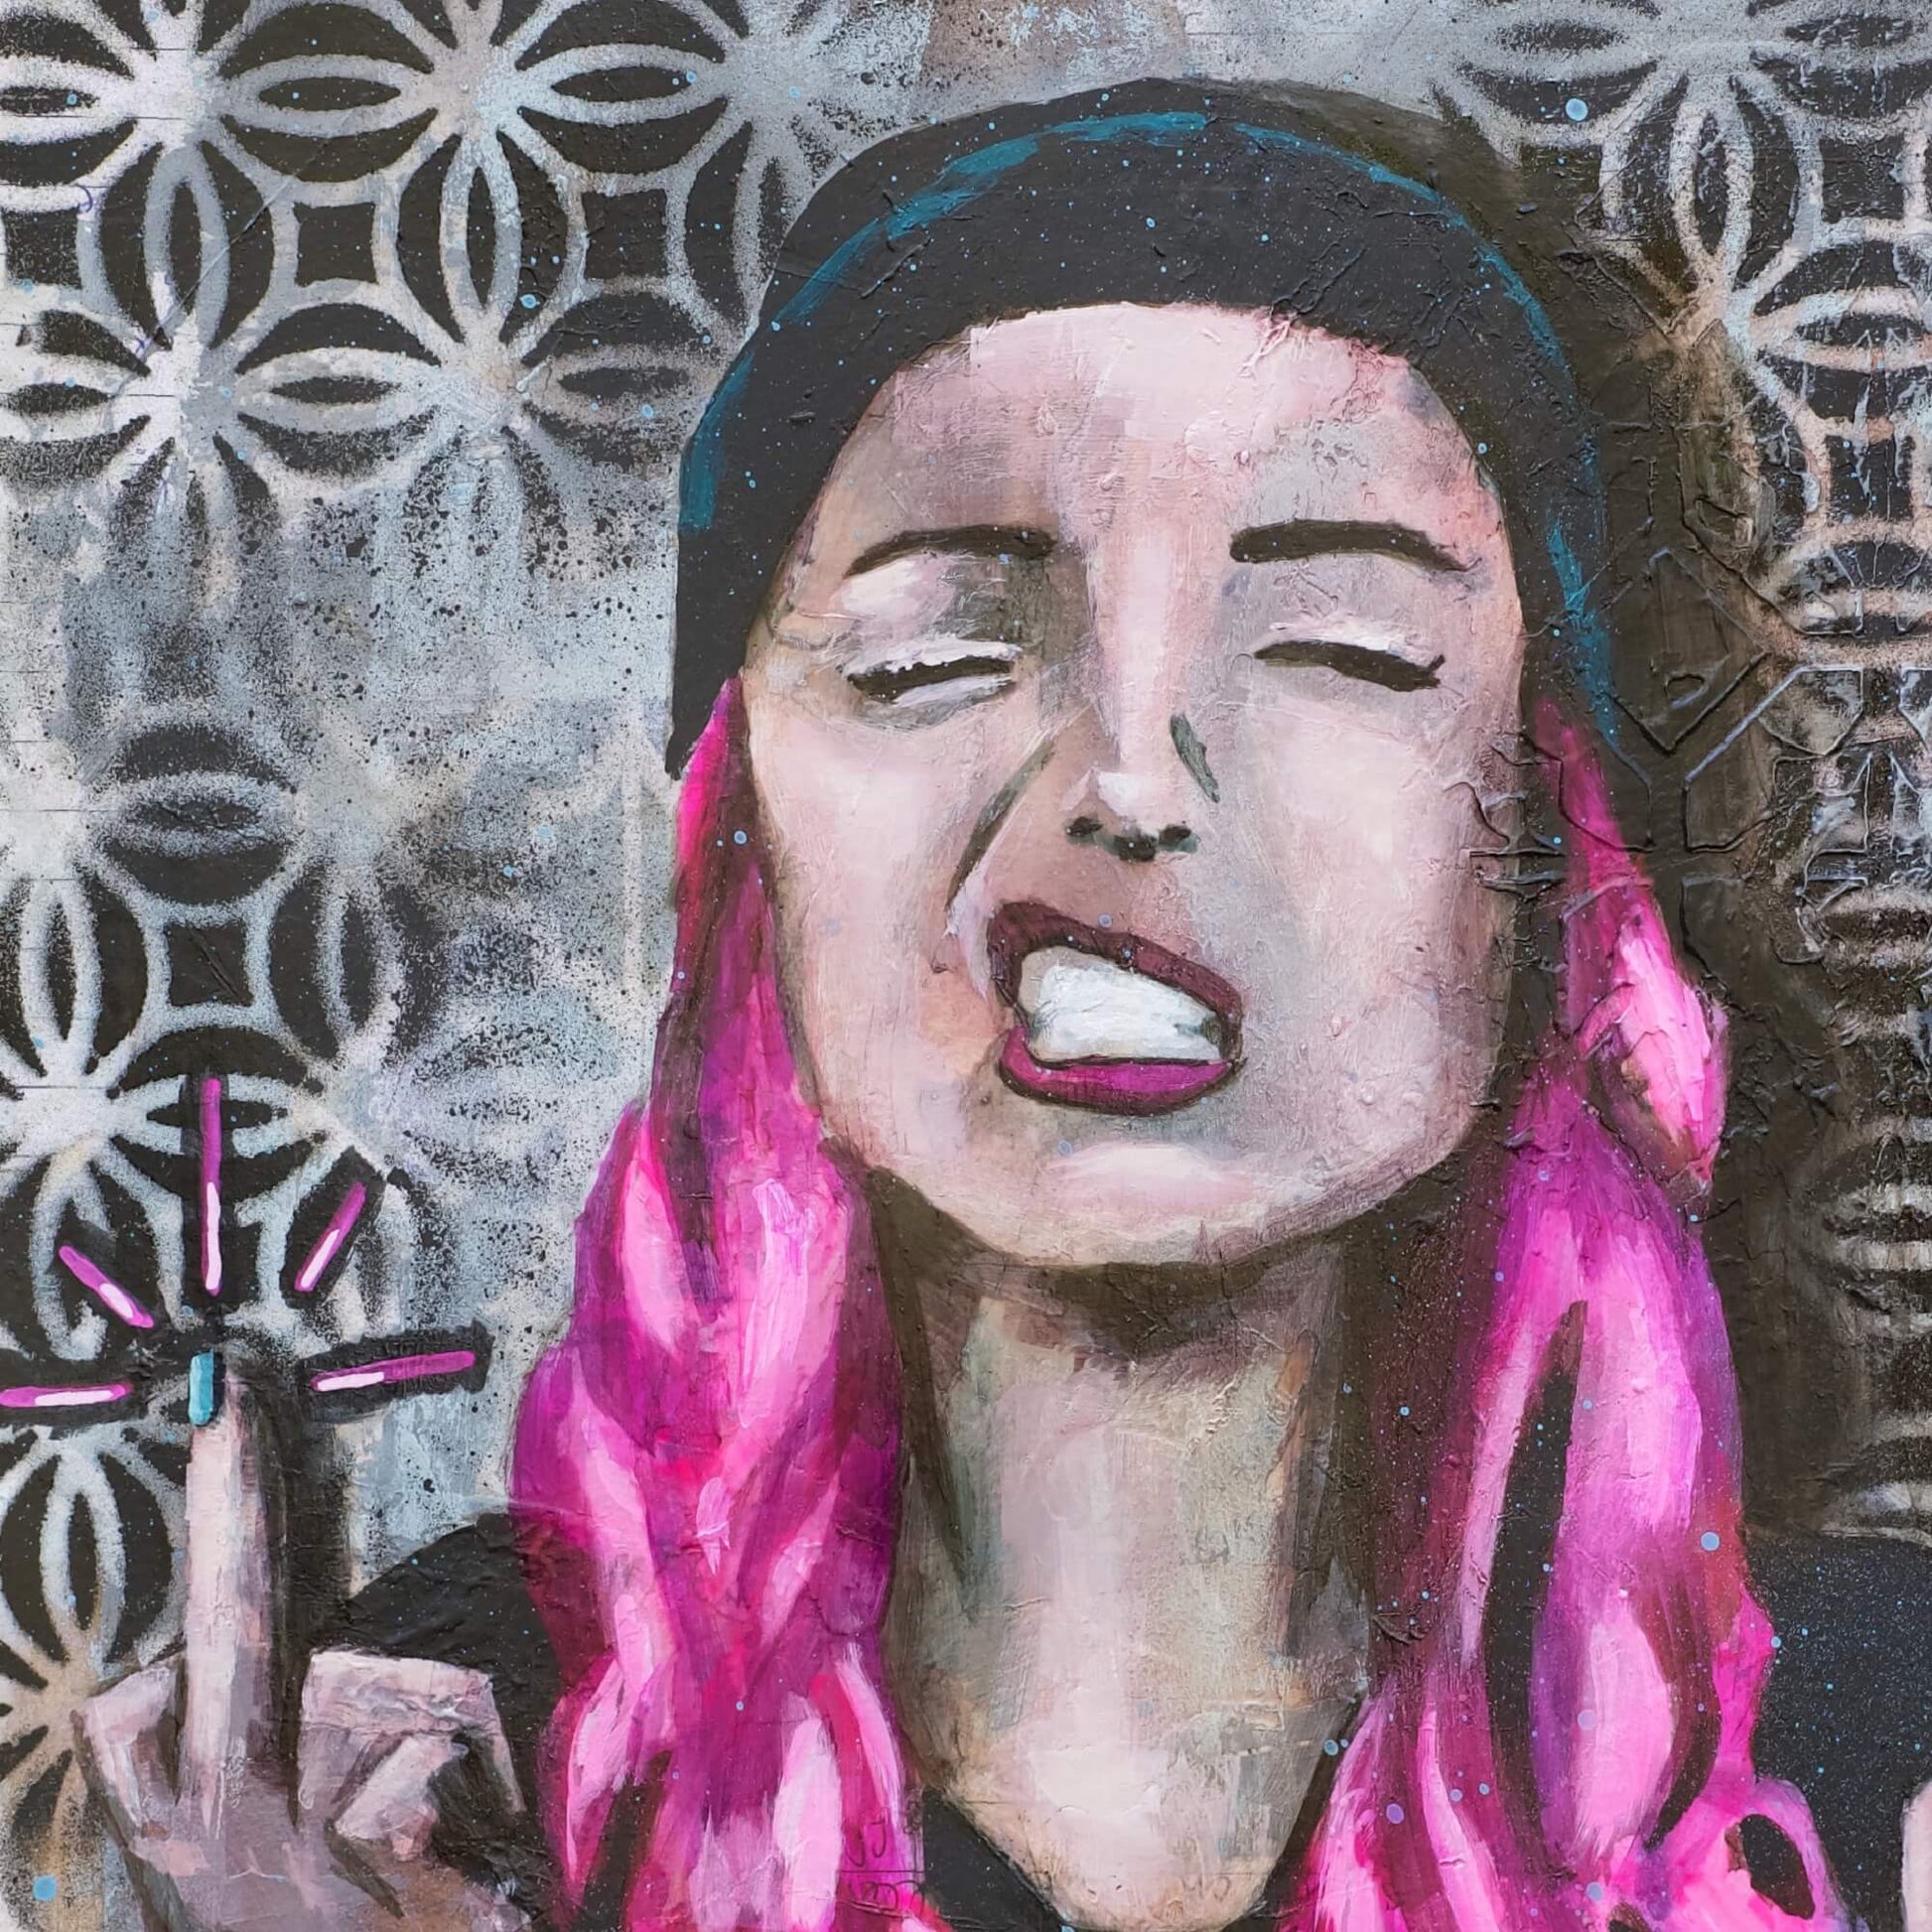 Artworks for Sale – A3 Pink & Black Painting of Woman with Middle Finger – Street Art – 'Say Cheese' – Art Wall Painting by Criss Chaney